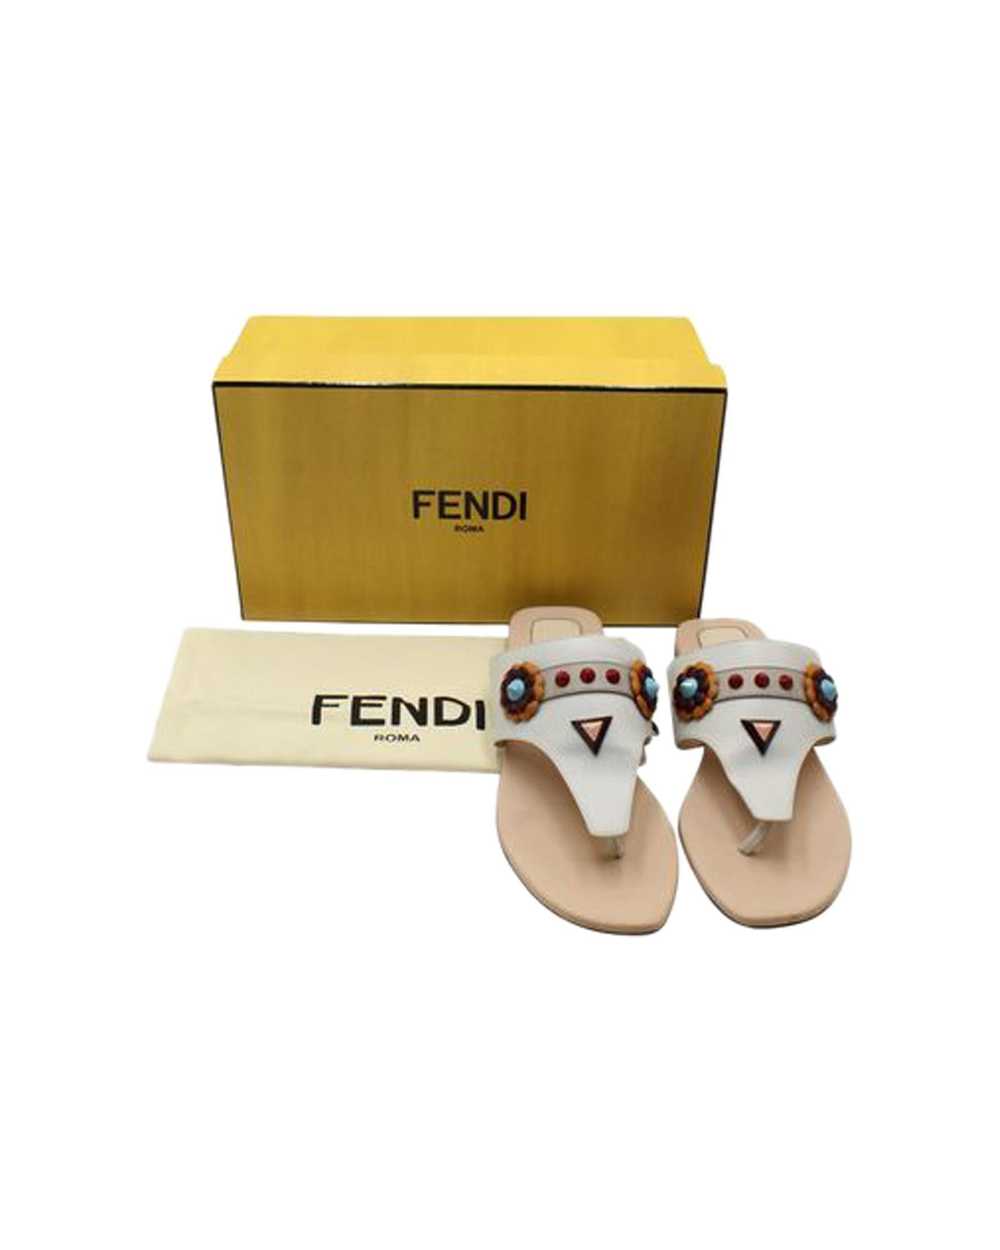 Fendi Leather Studded Thong Sandals from Italy - image 6